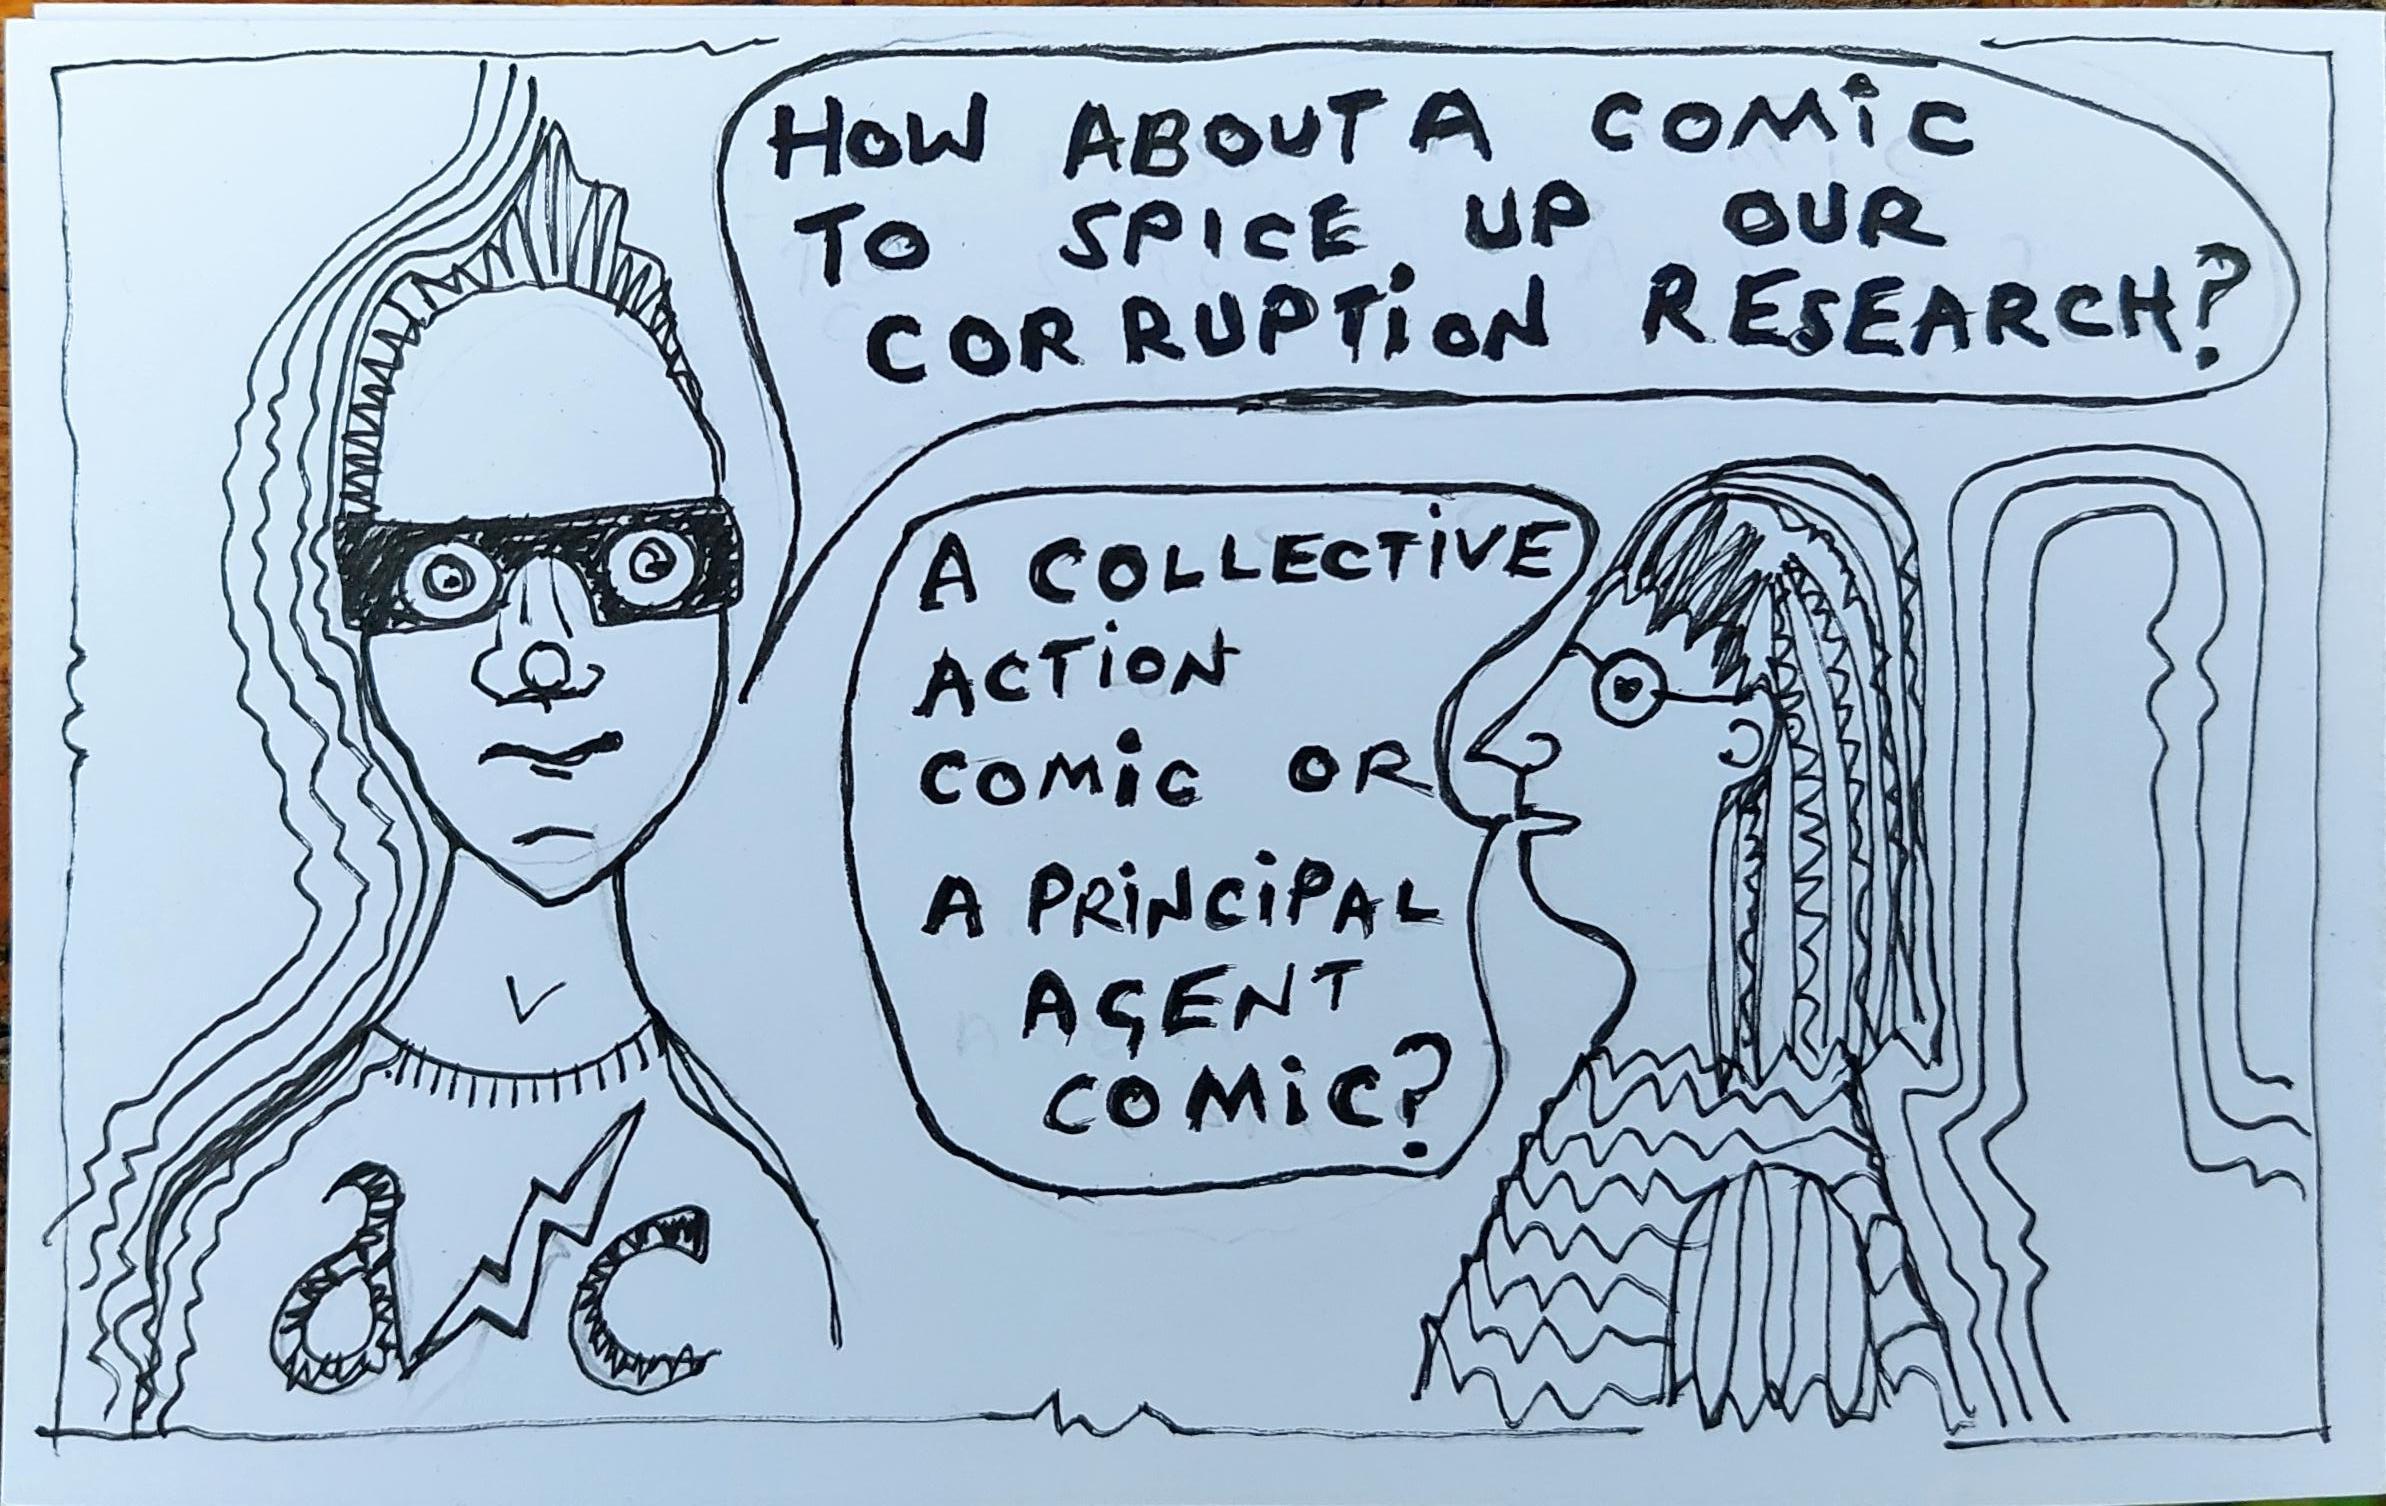 A simple line-drawing showing an anti-corruption superhero, saying 'How about a comic to spice up our corruption research?' A woman replies 'A collective action comic or a principal agent comic?'